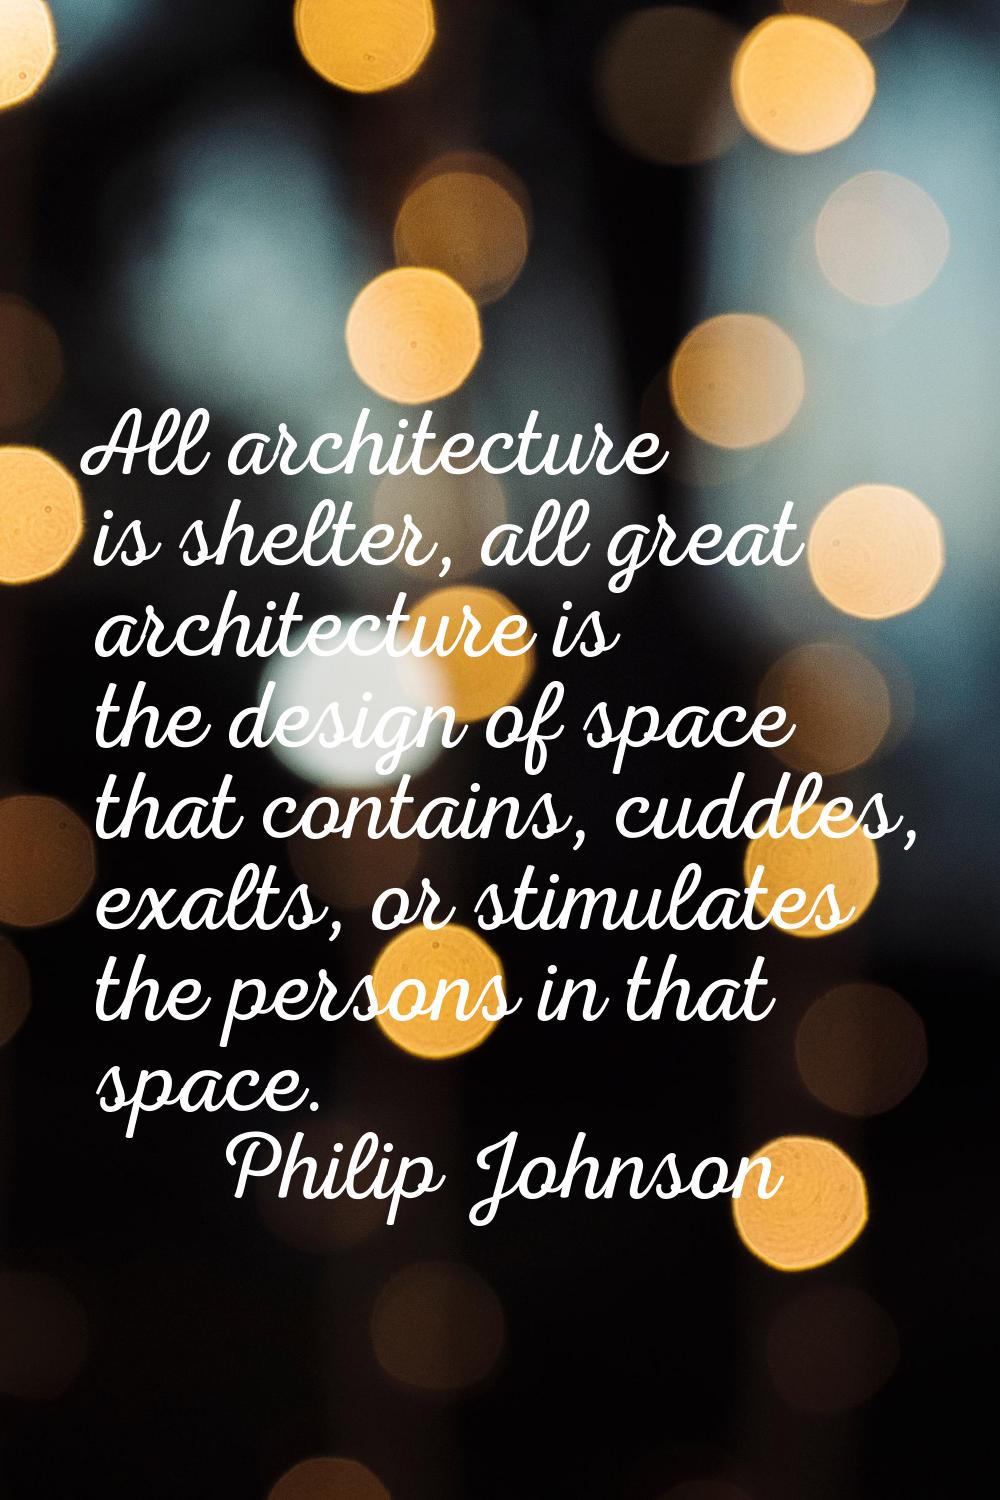 All architecture is shelter, all great architecture is the design of space that contains, cuddles, 